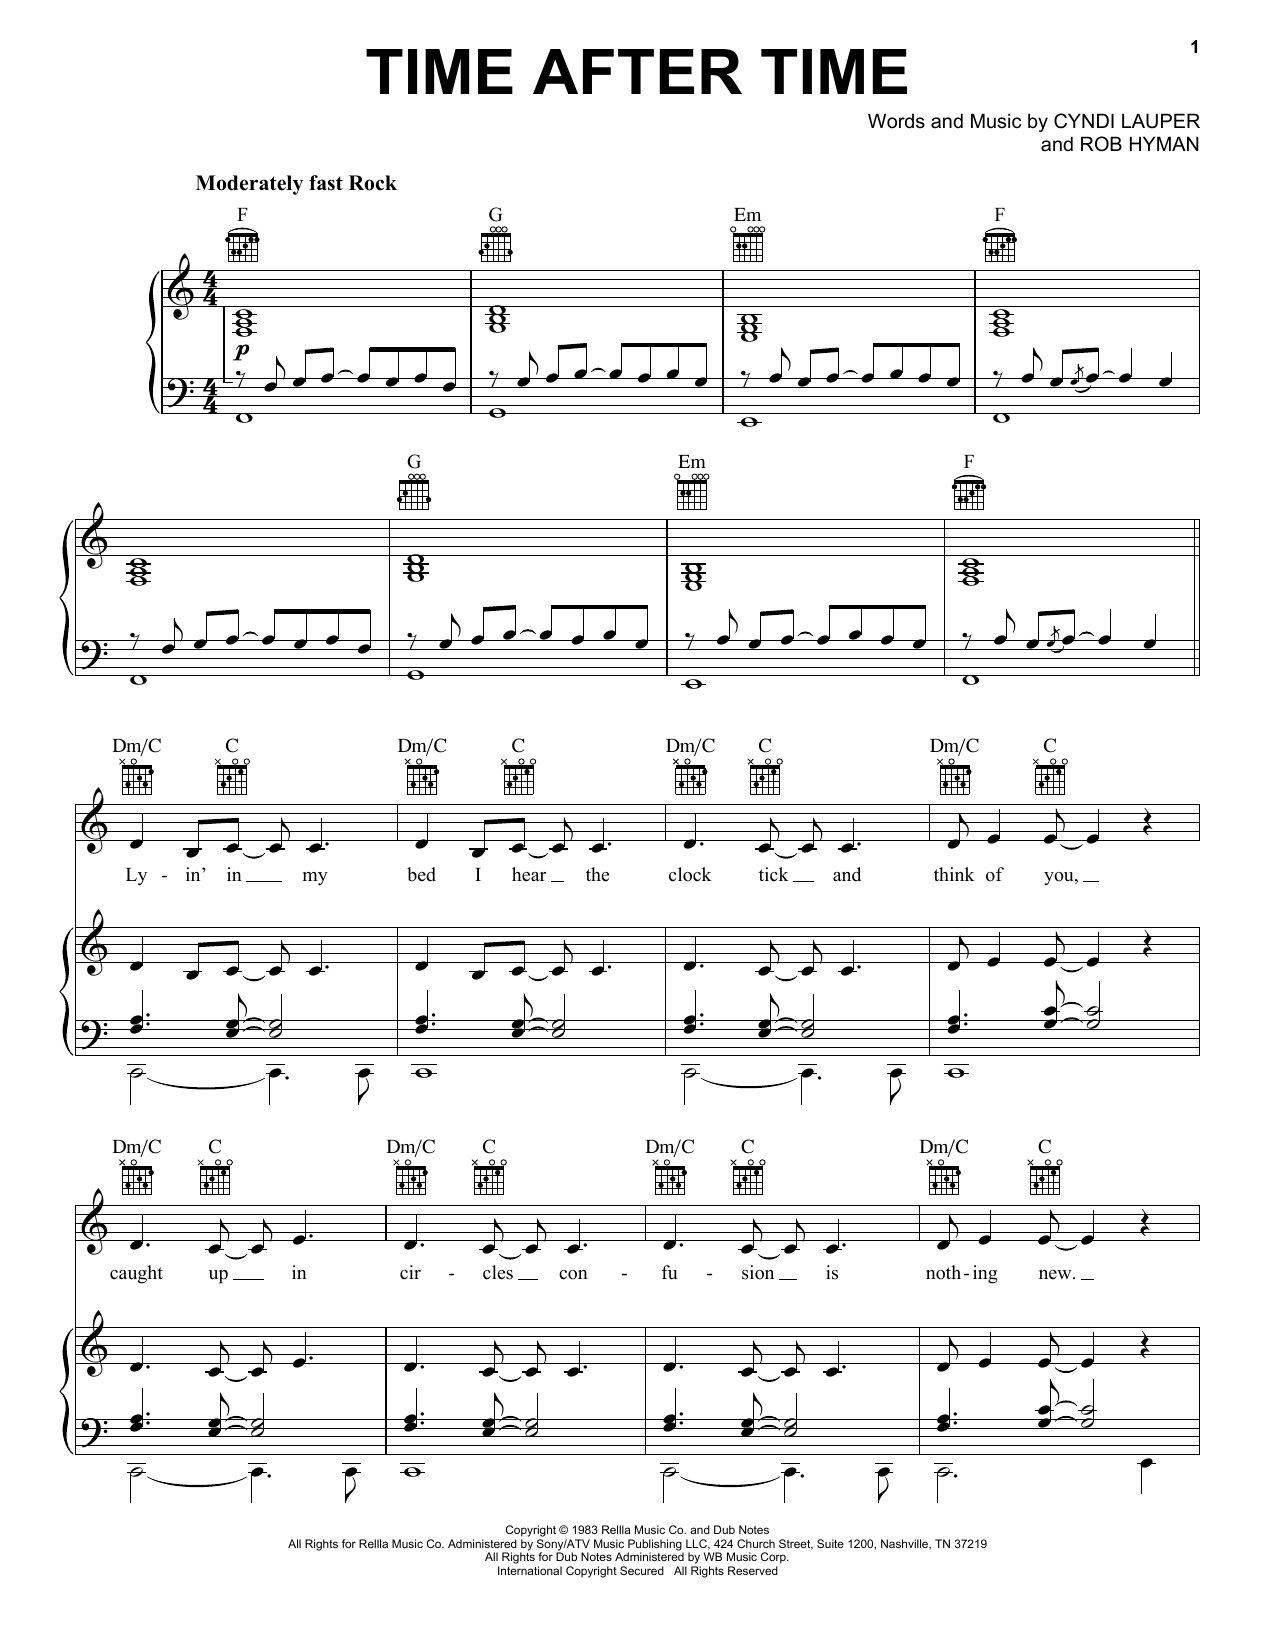 Cyndi Lauper Time After Time sheet music notes and chords. Download Printable PDF.